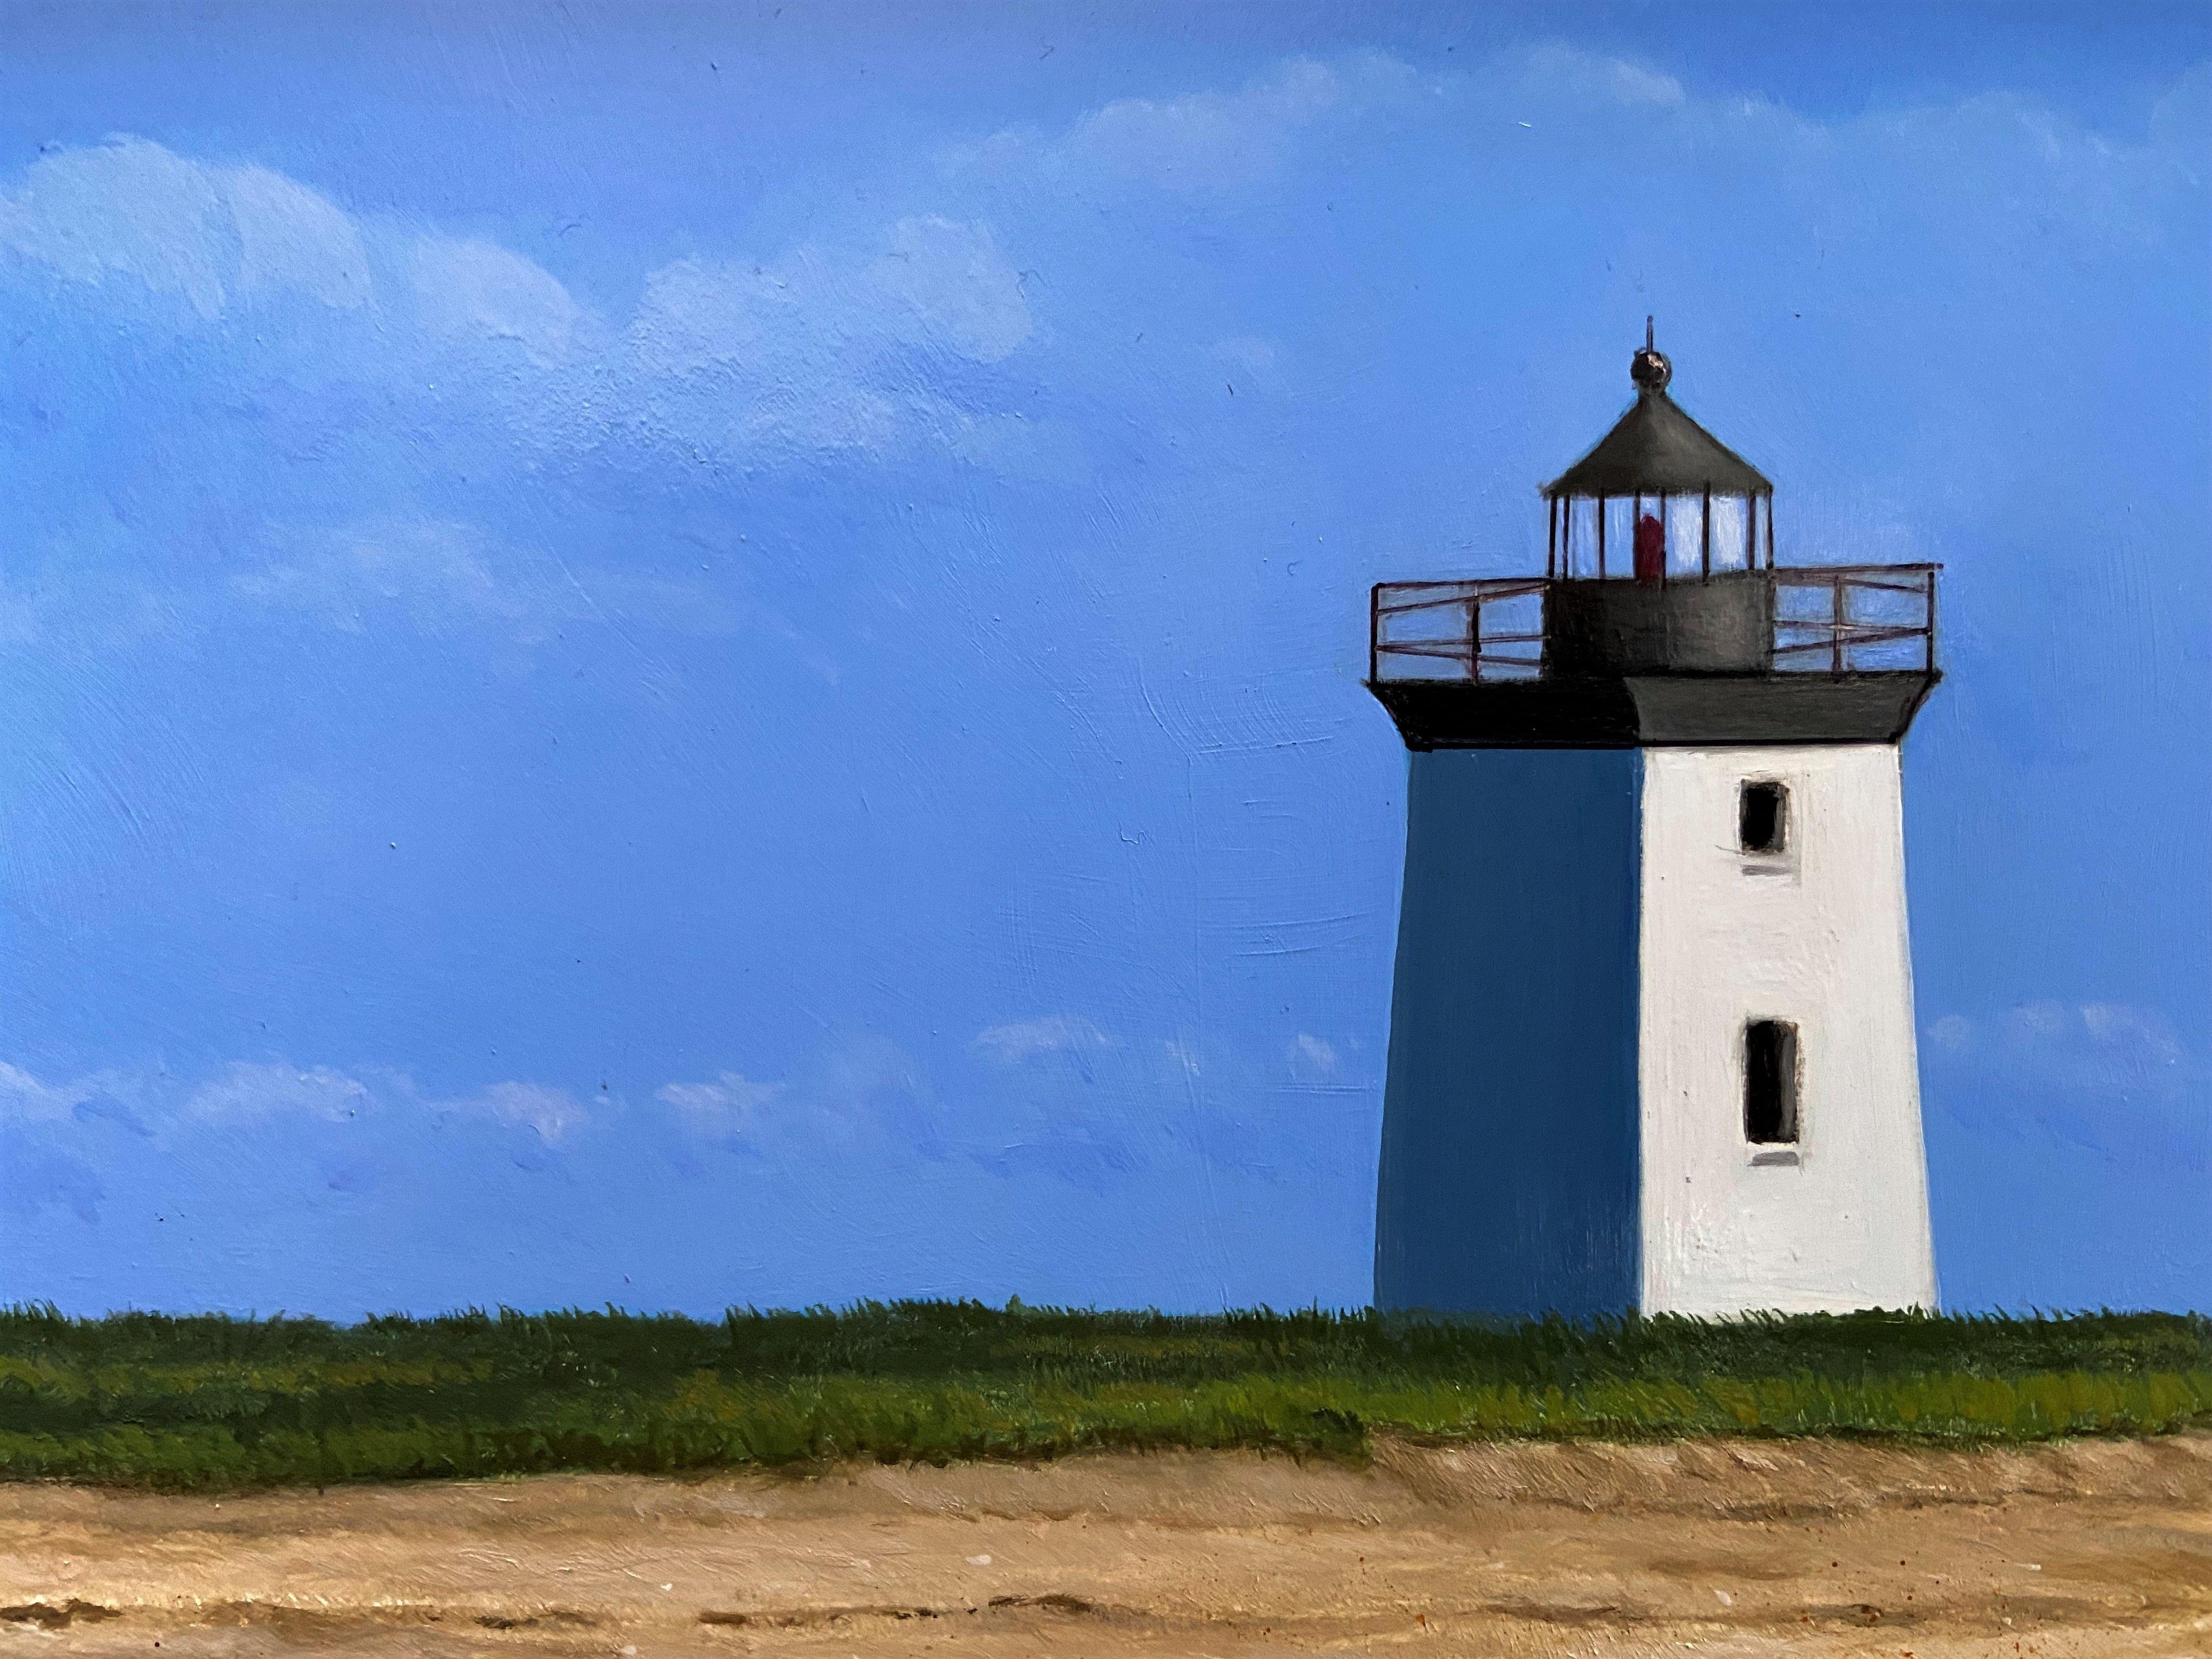 This piece is an actual working lighthouse on the tip of Cape Cod near Race Point.  Wood End Light was built in the 1870's.  This is a realistic piece painted on a smooth panel and varnished for a nice glass like finish.  It will look fantastic in